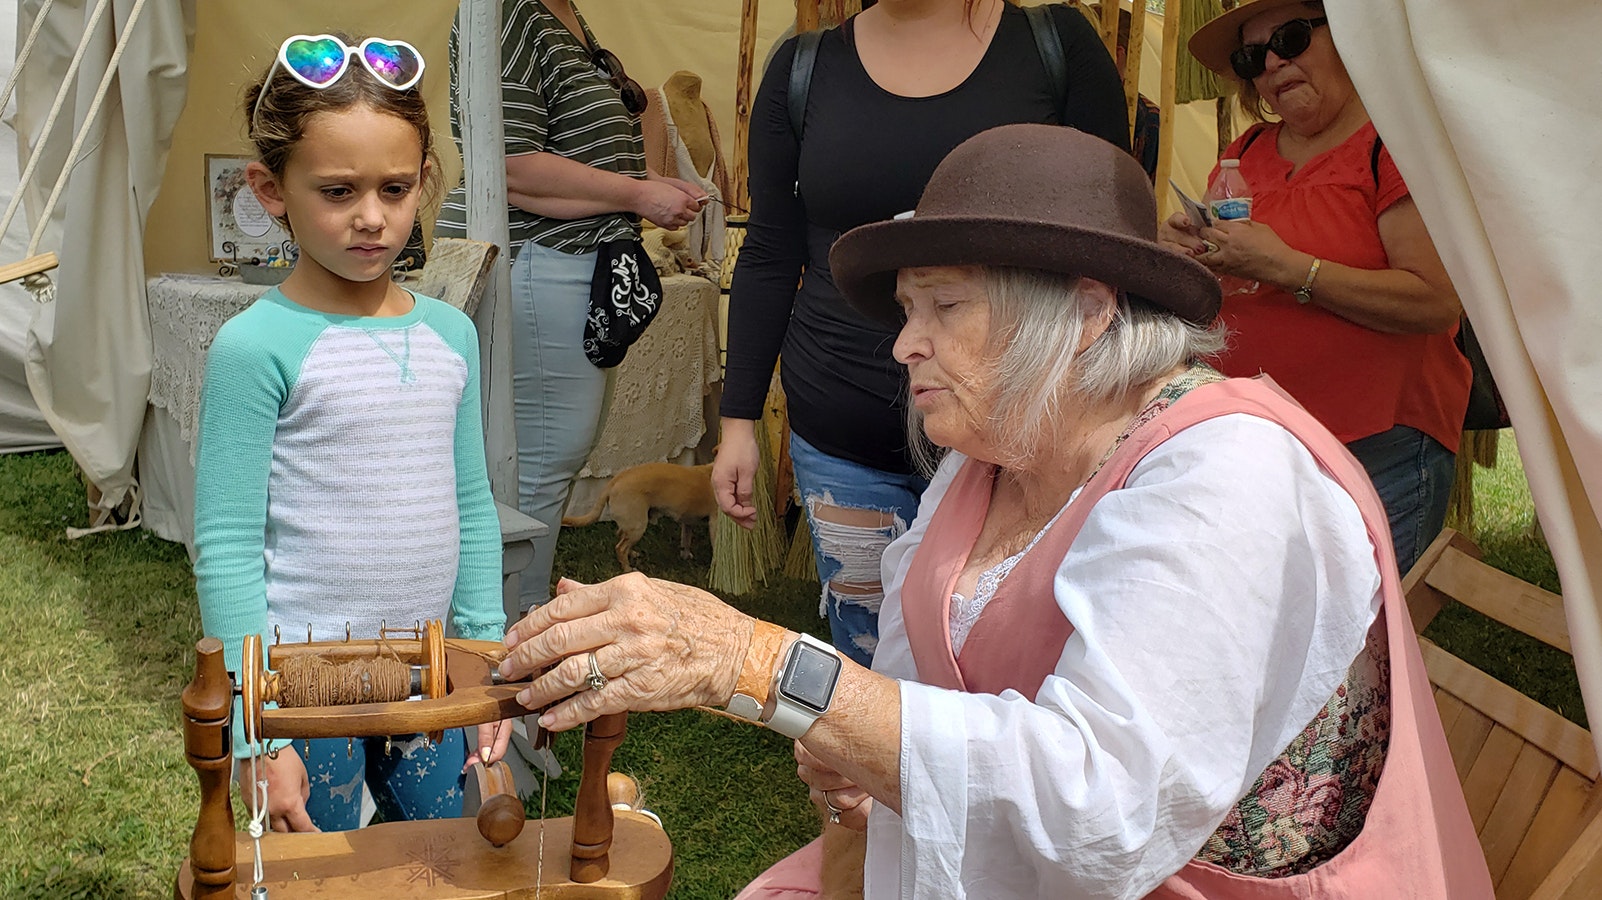 Melinda Barlow demonstrates spinning to a child passing by her tent in Trader's Row at the Fort Bridger Rendezvous.